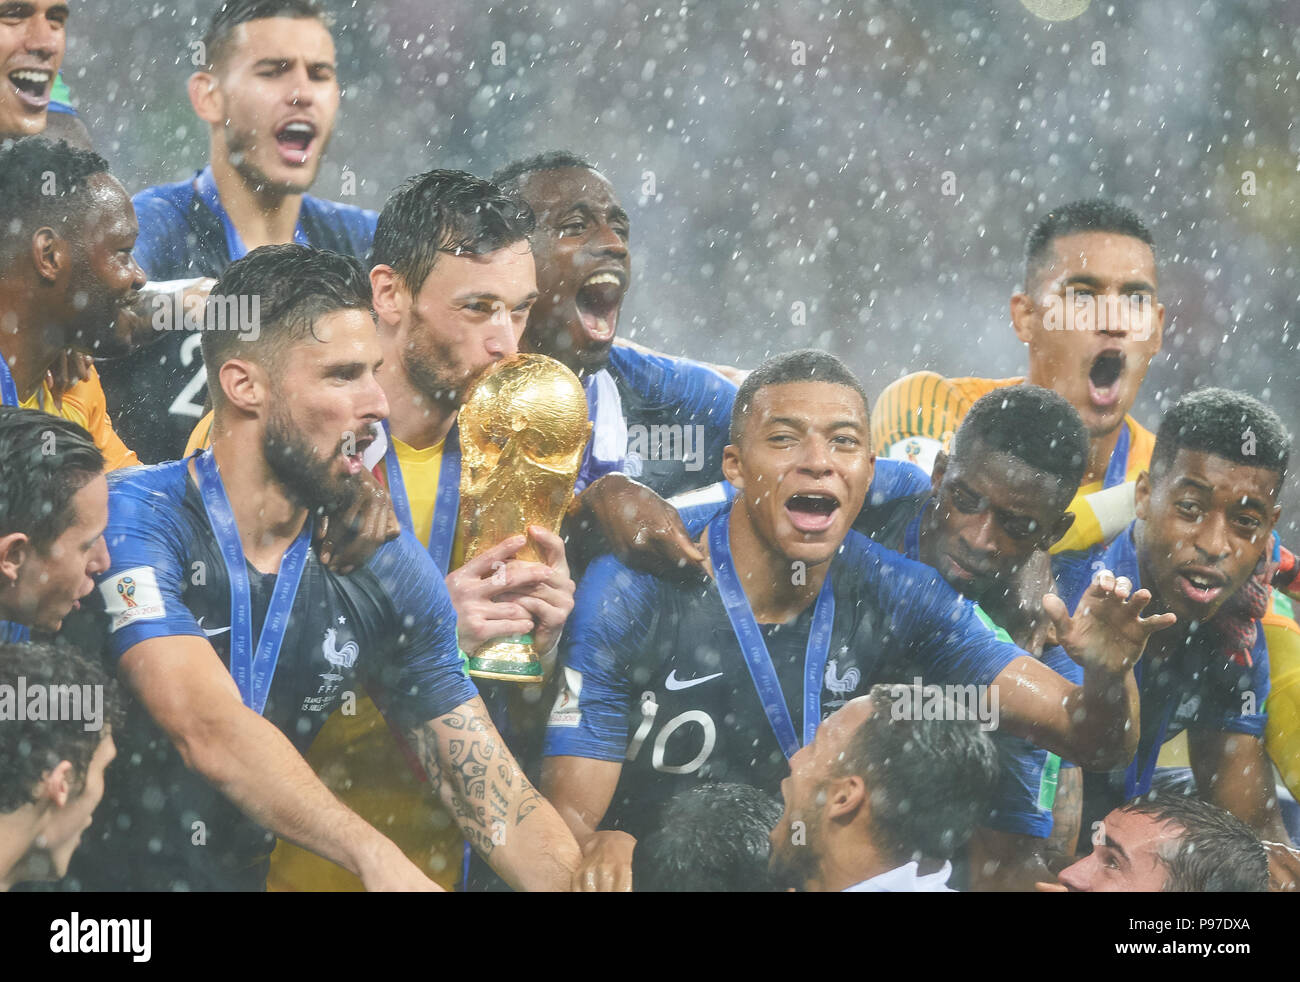 Moscow, Russia. 15th July 2018. Moscow, Russia. 15th July 2018.  Hugo LLORIS, Fra 1 goalkeeper, Kylian MBAPPE, FRA 10 Olivier GIROUD, FRA 9  with the Official FIFA World Cup Original Trophy, winner, victory, ceremony,  FRANCE  - CROATIA 4-1 Football FIFA WORLD CUP 2018 RUSSIA, Final, Season 2018/2019,  July 15, 2018 in Luzhniki Stadium Moscow, Russia. © Peter Schatz / Alamy Live News Stock Photo